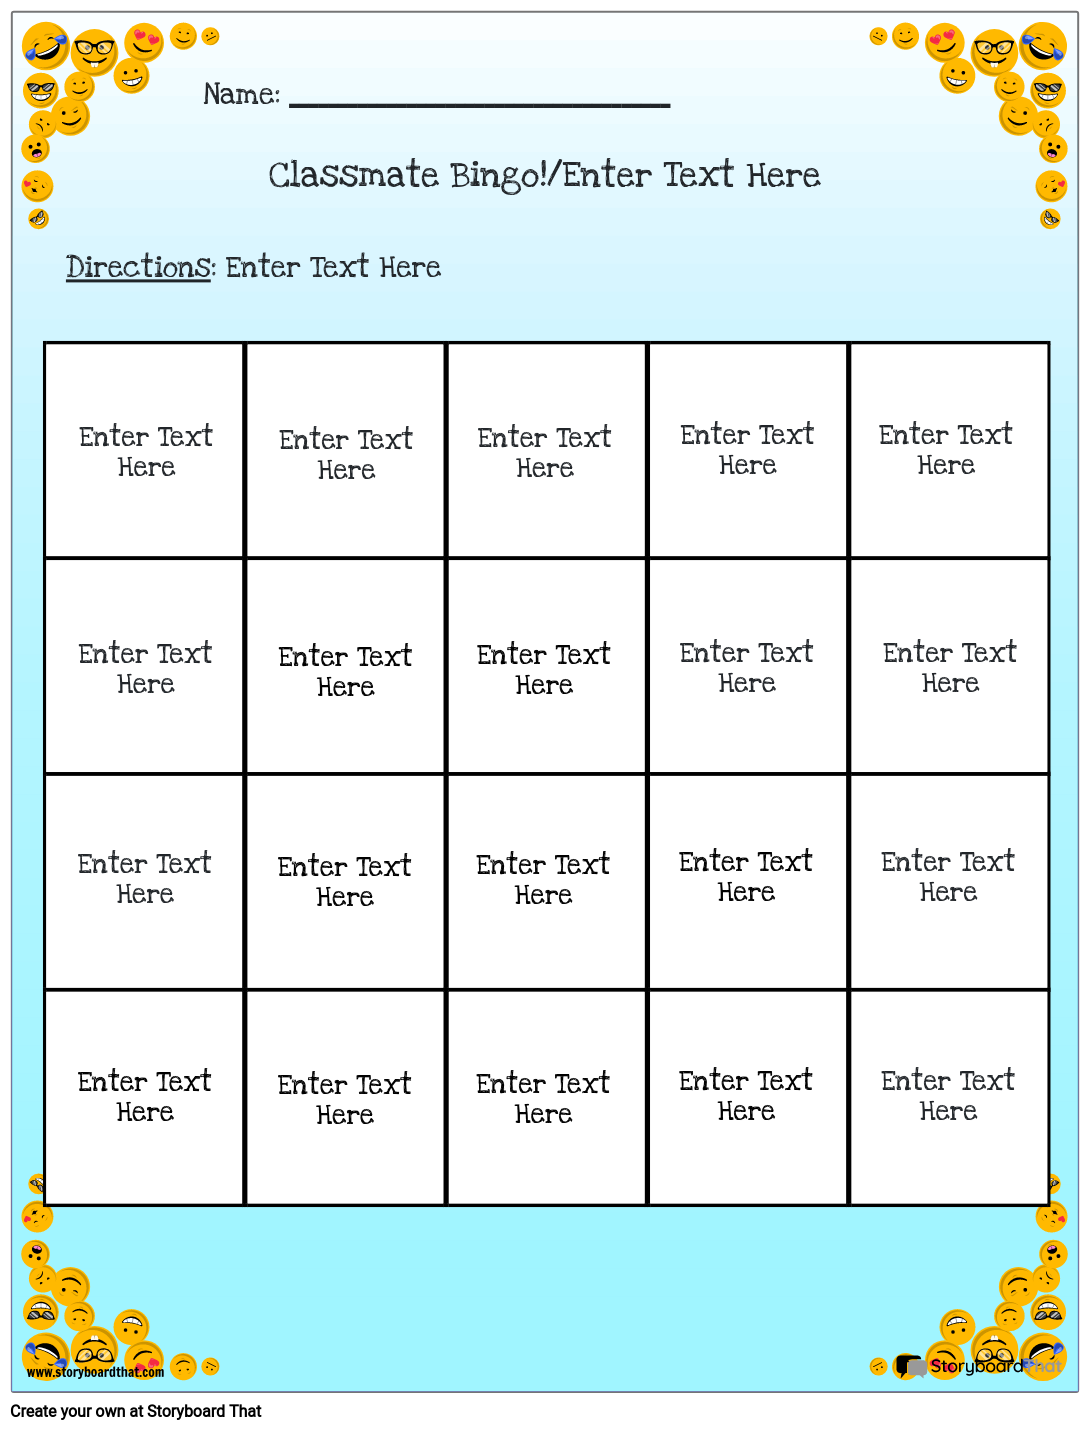 First Day Activities Bingo Sheet with Smiley Face Background